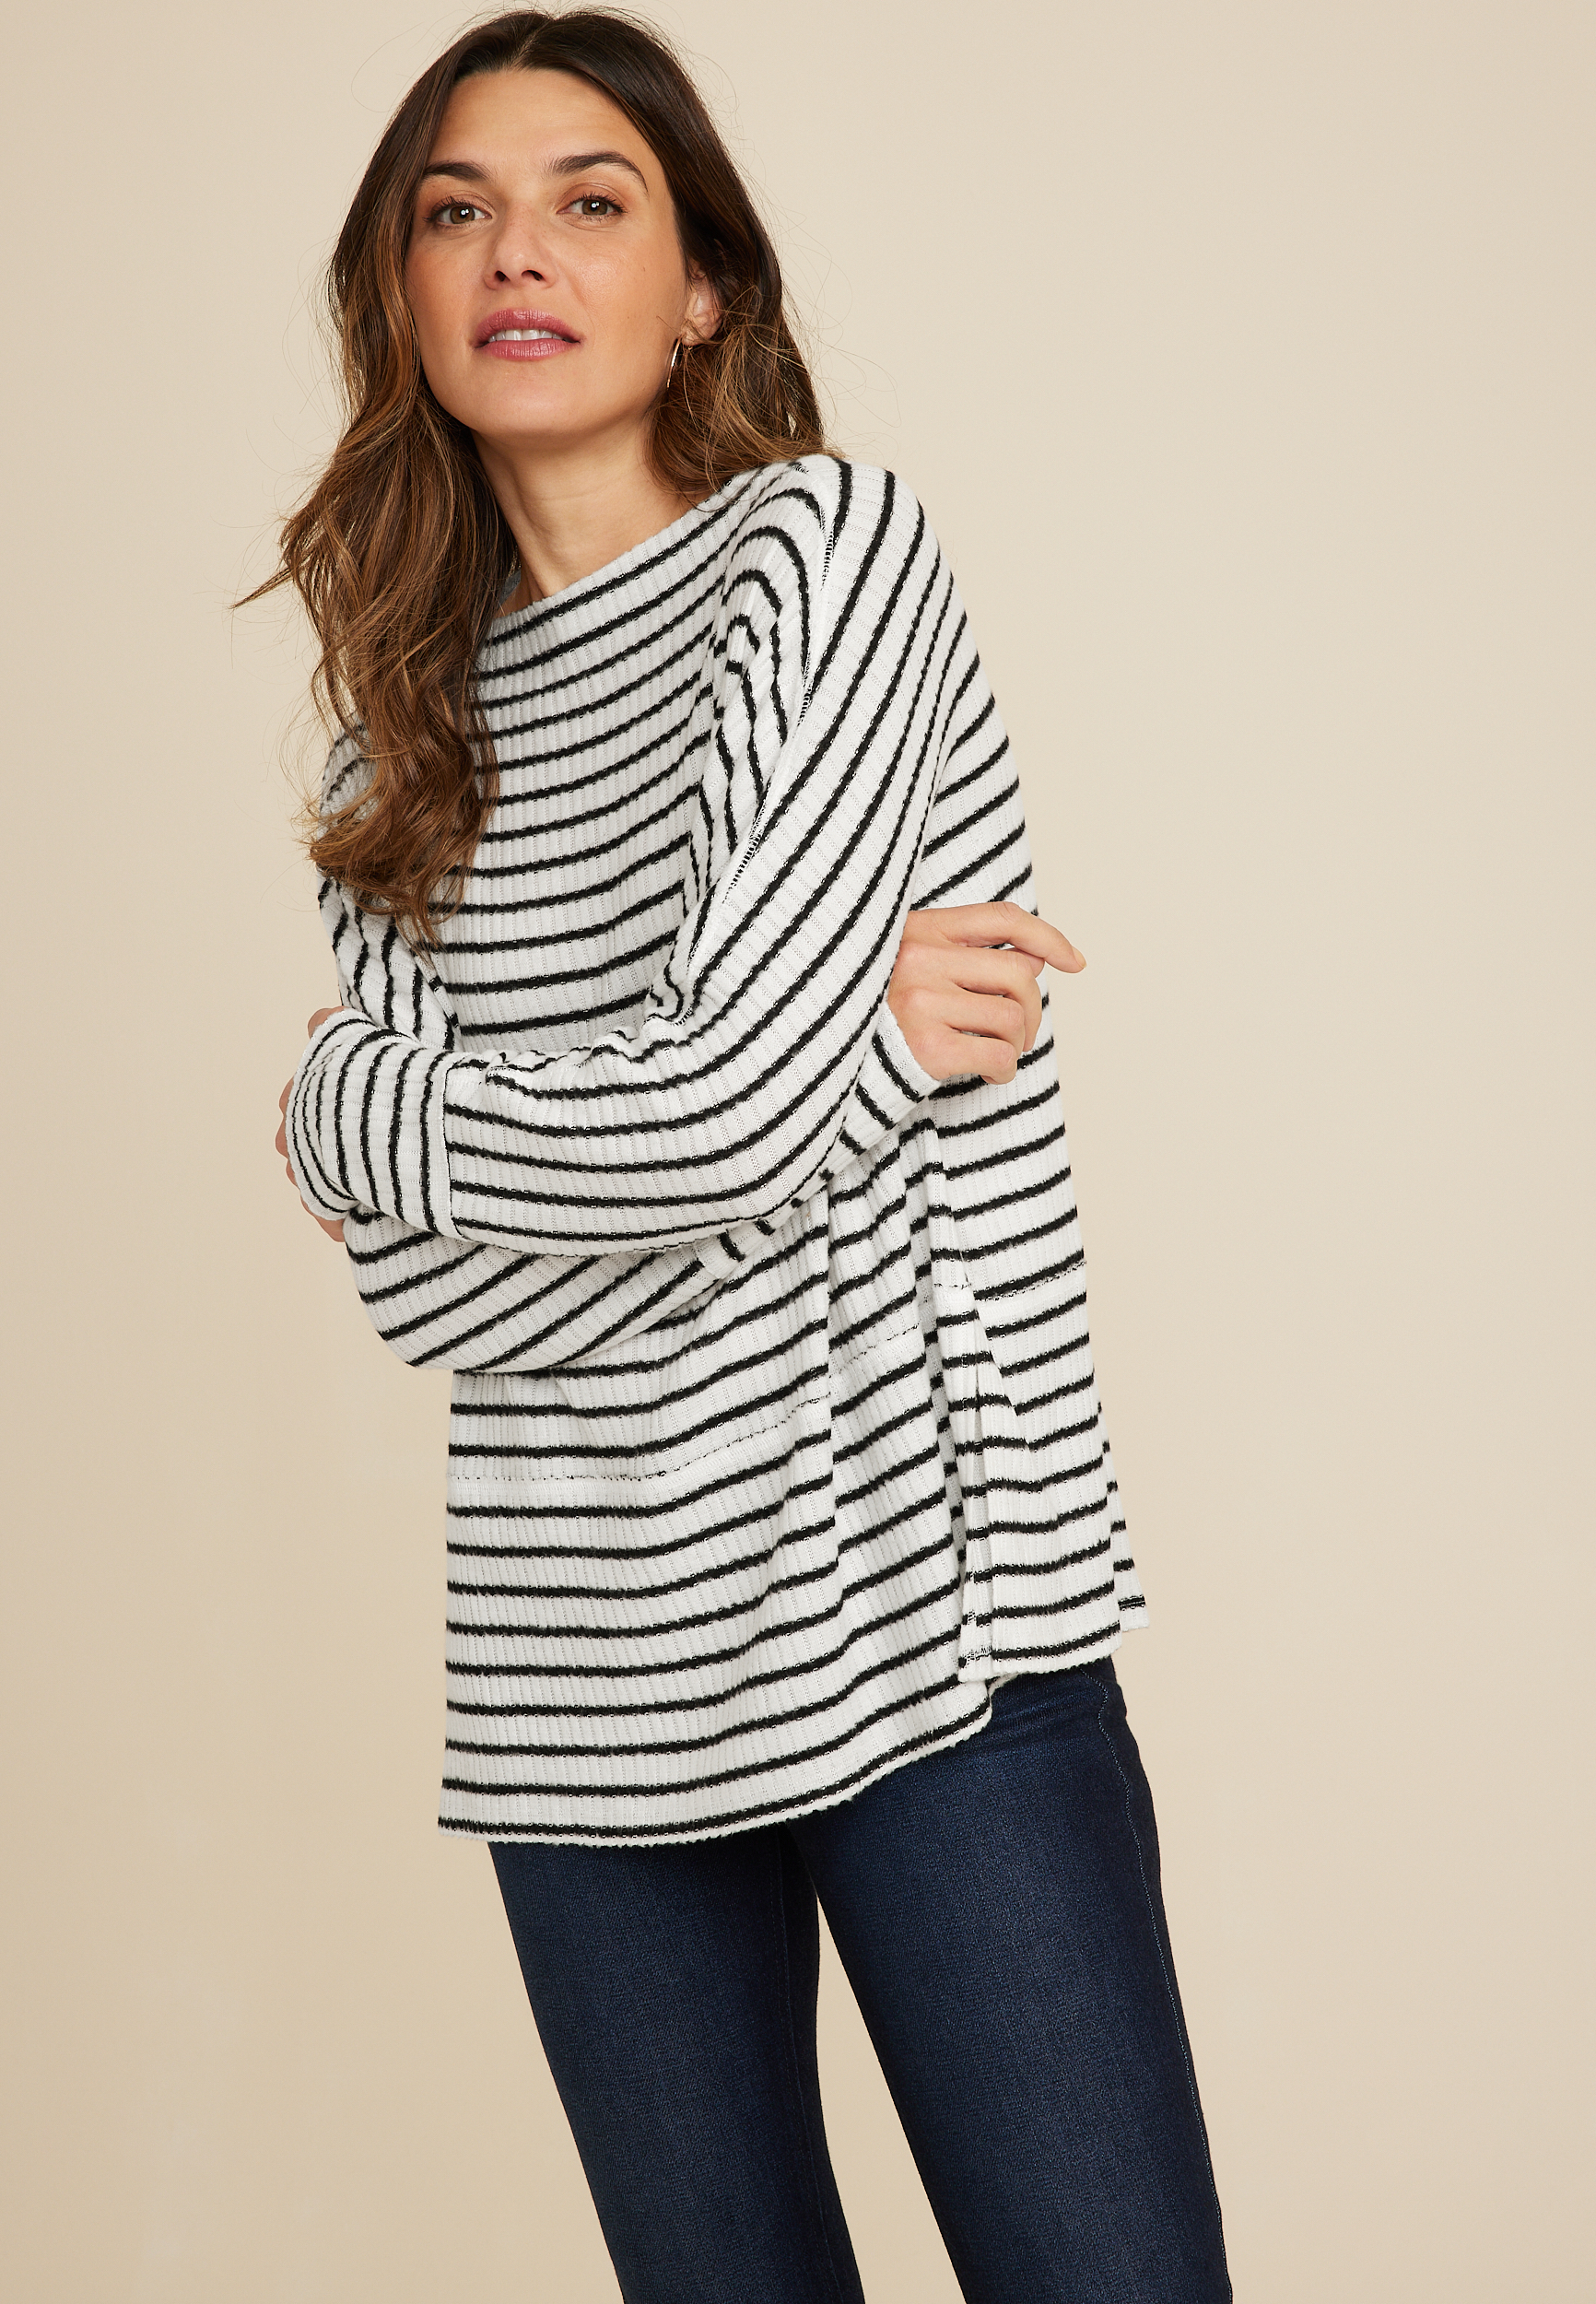 Sylvan Striped Tunic Top | maurices